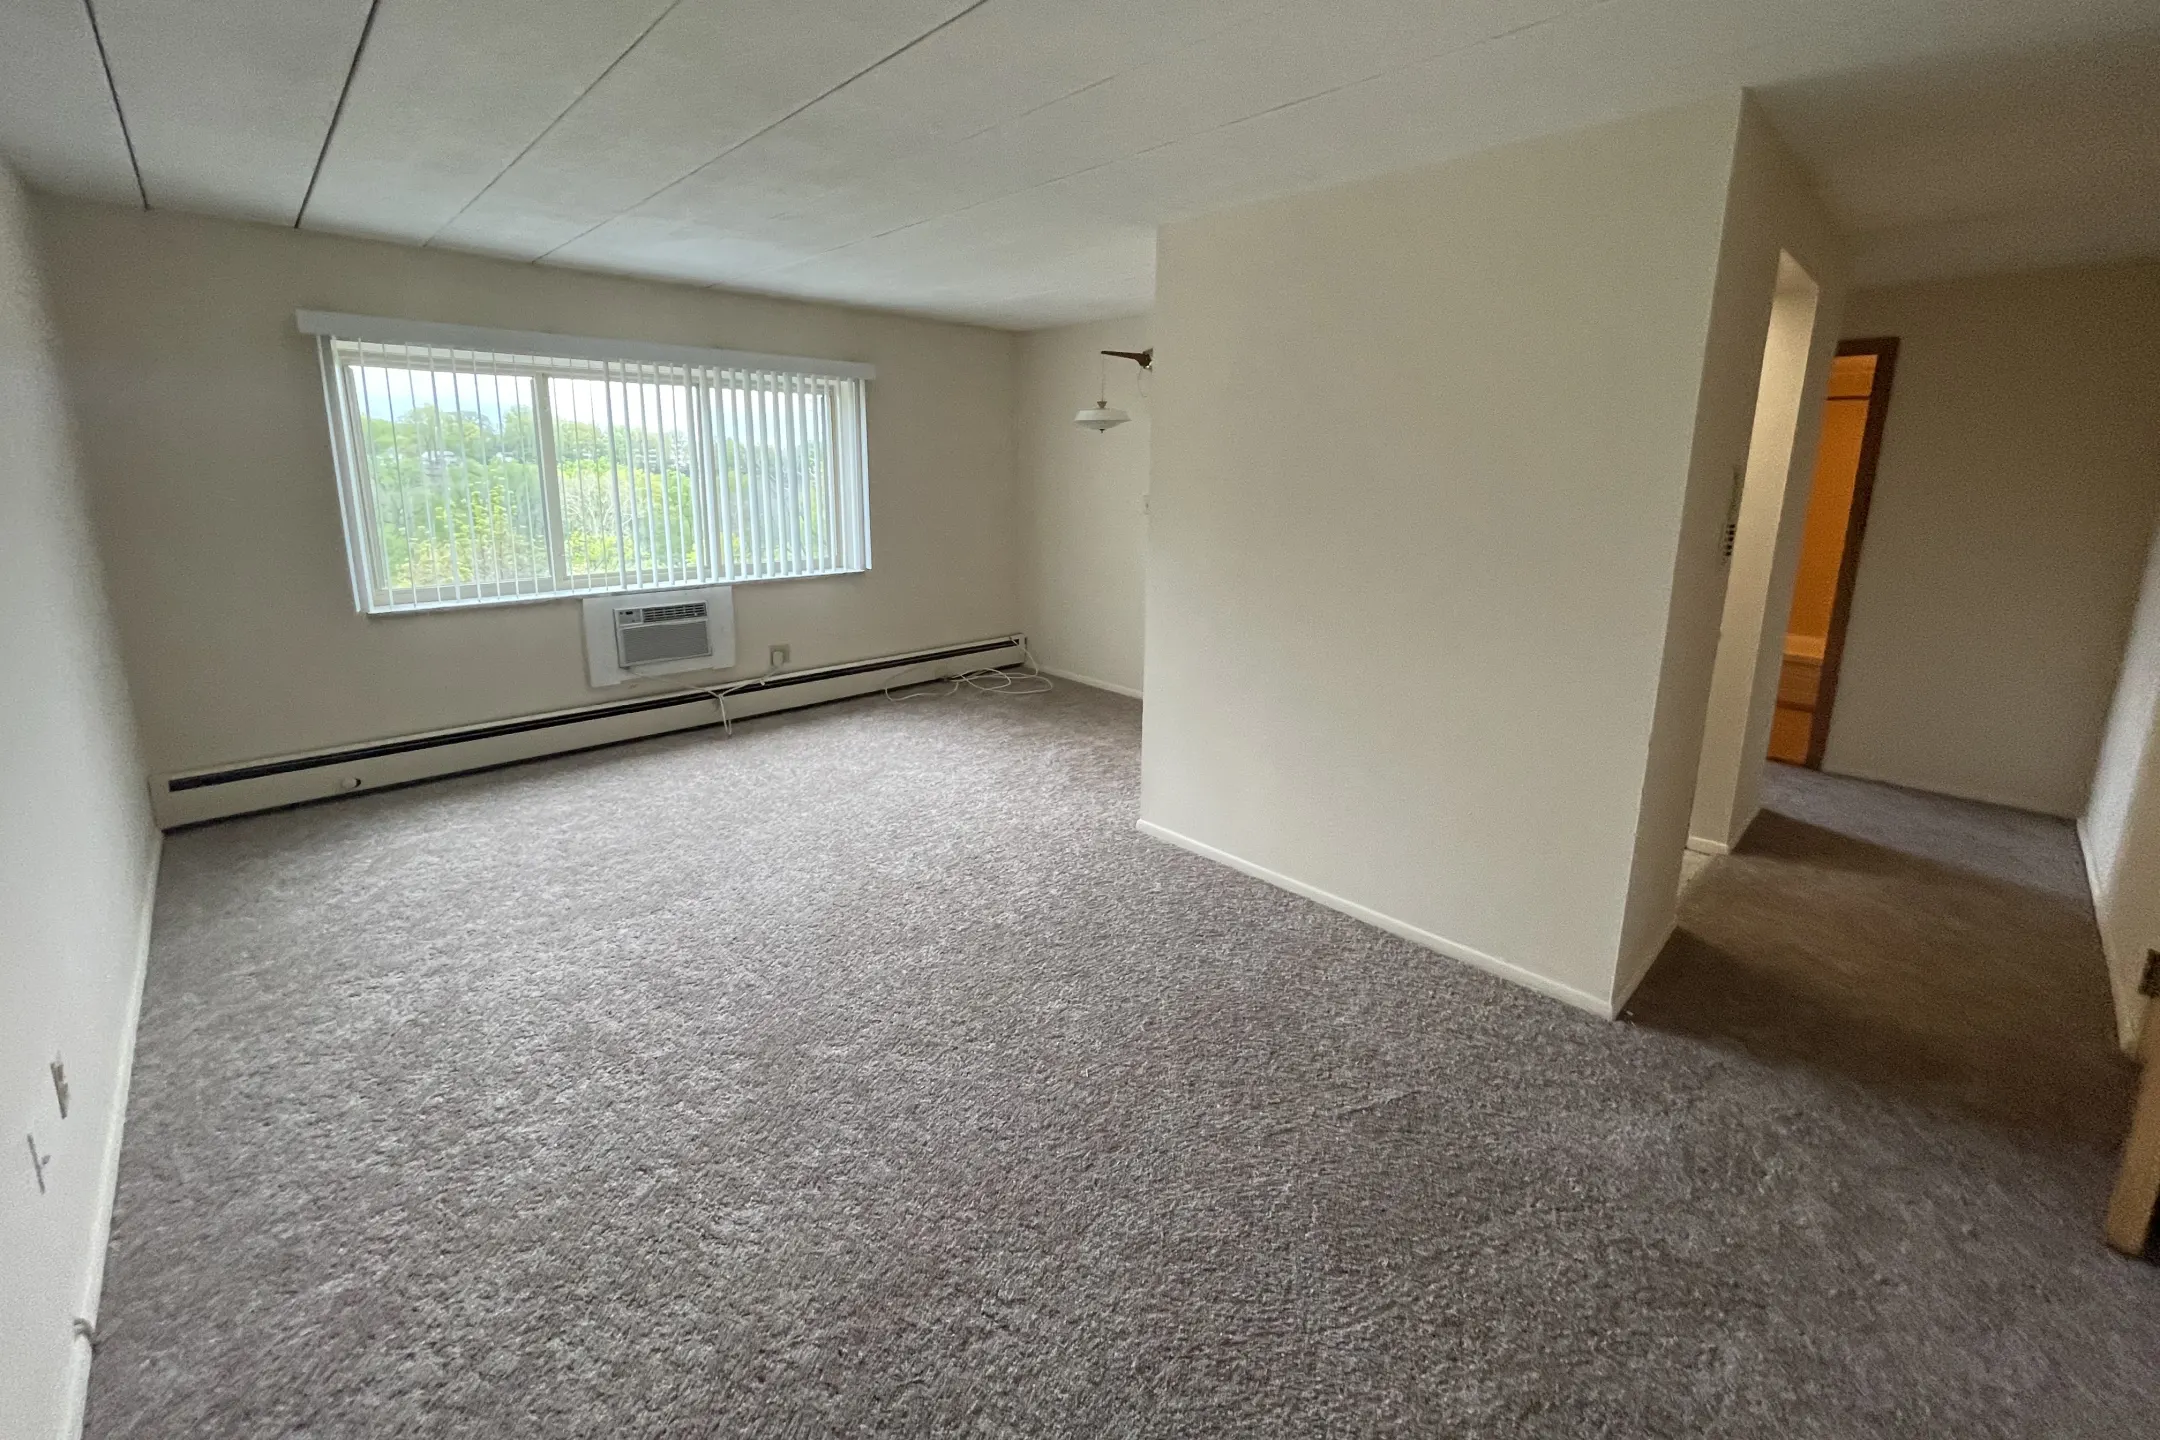 Living Room - Commodore Club Apartments - Lakewood, OH